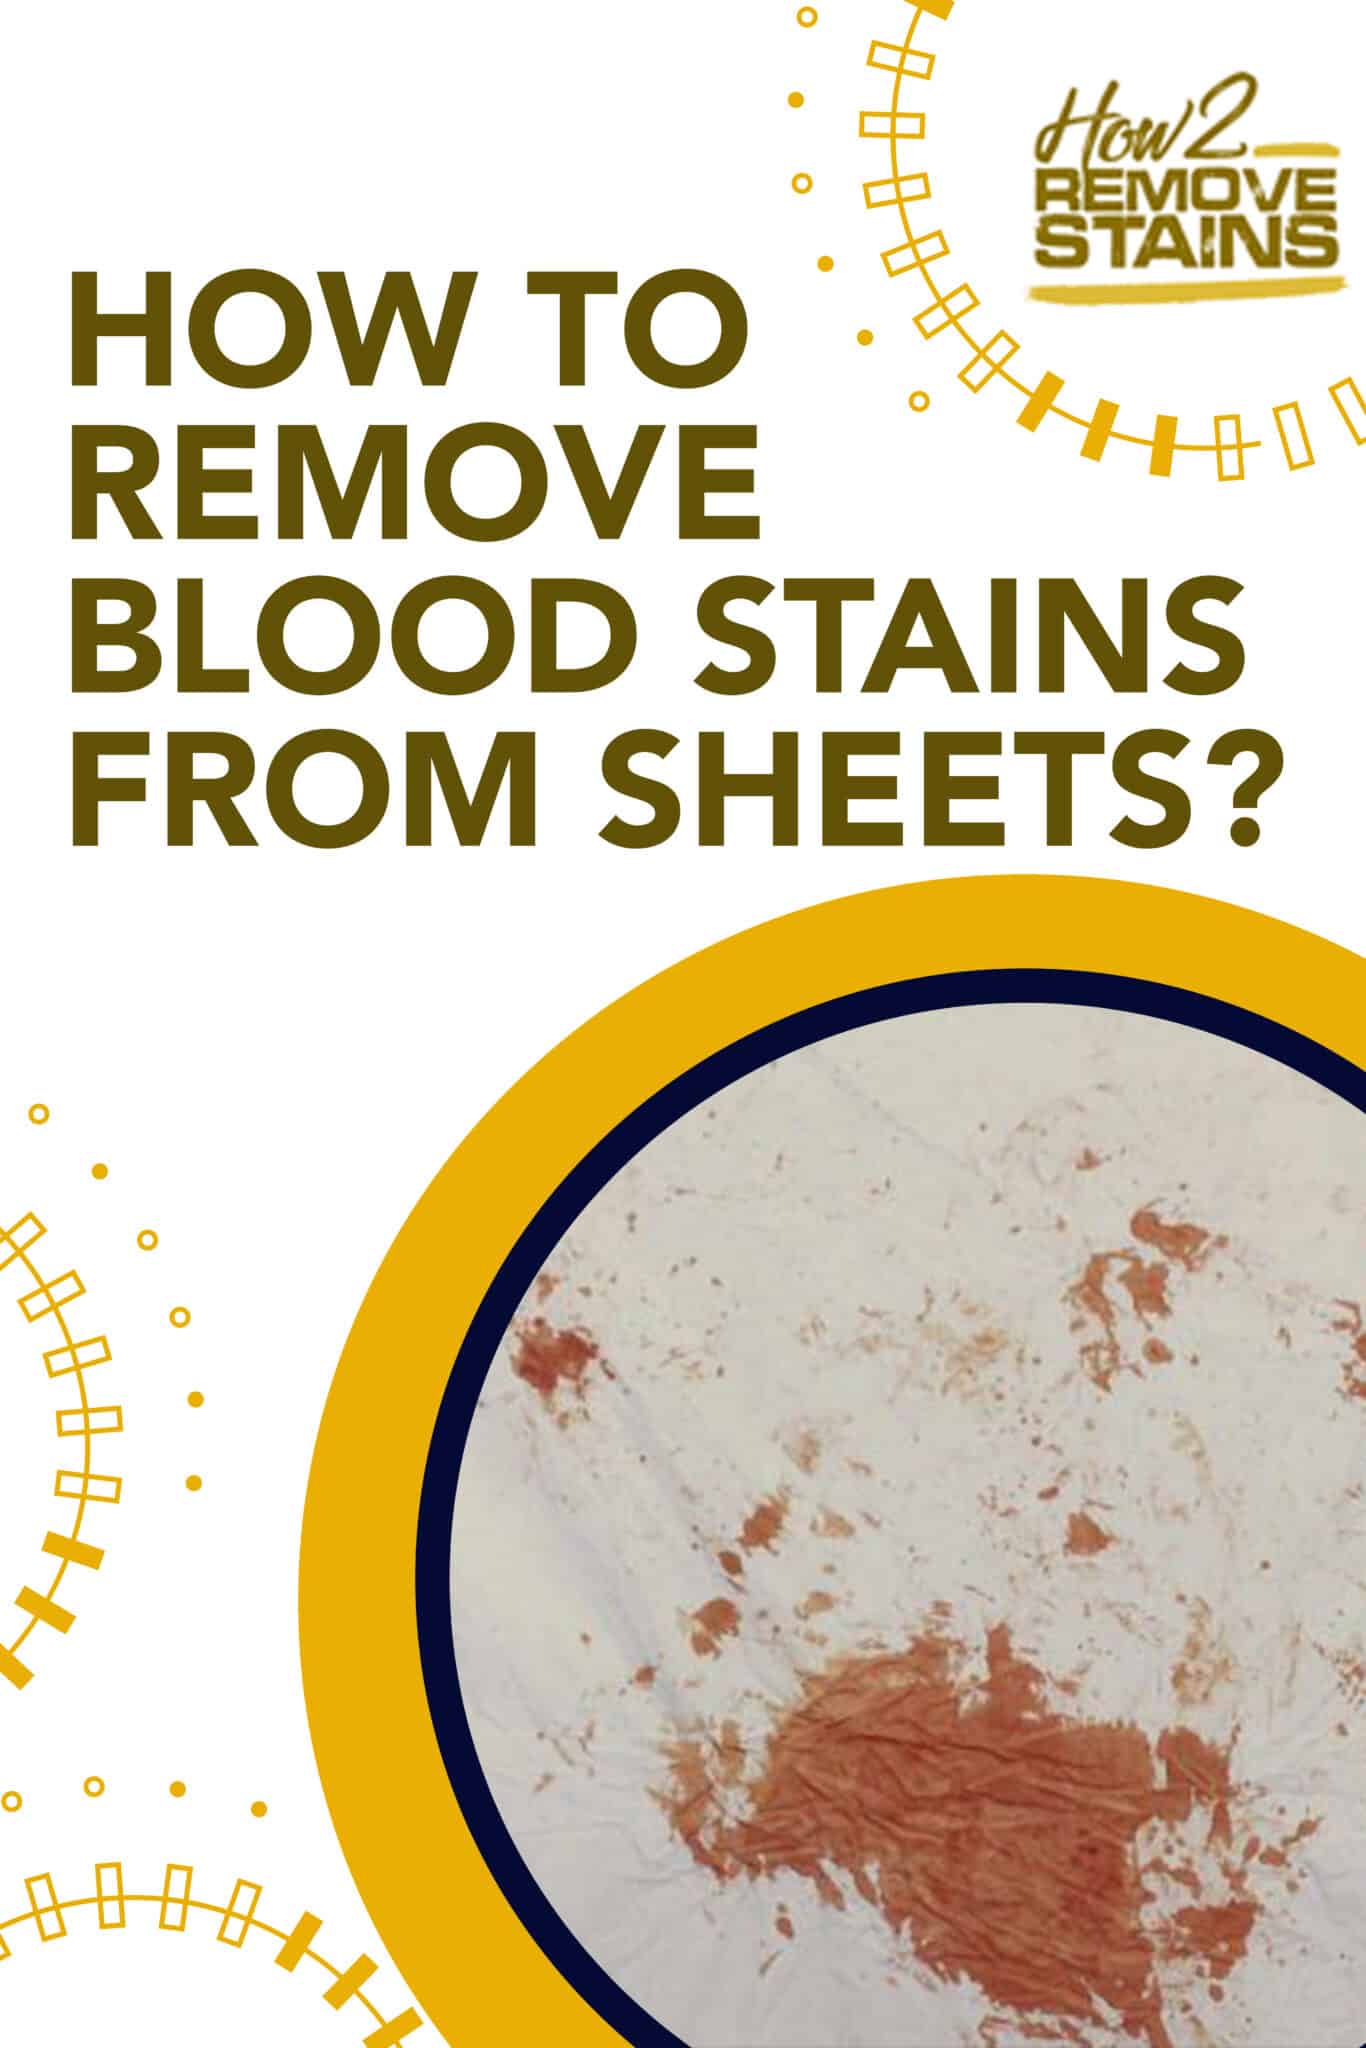 How to remove blood stains from sheets [ Detailed Answer ]